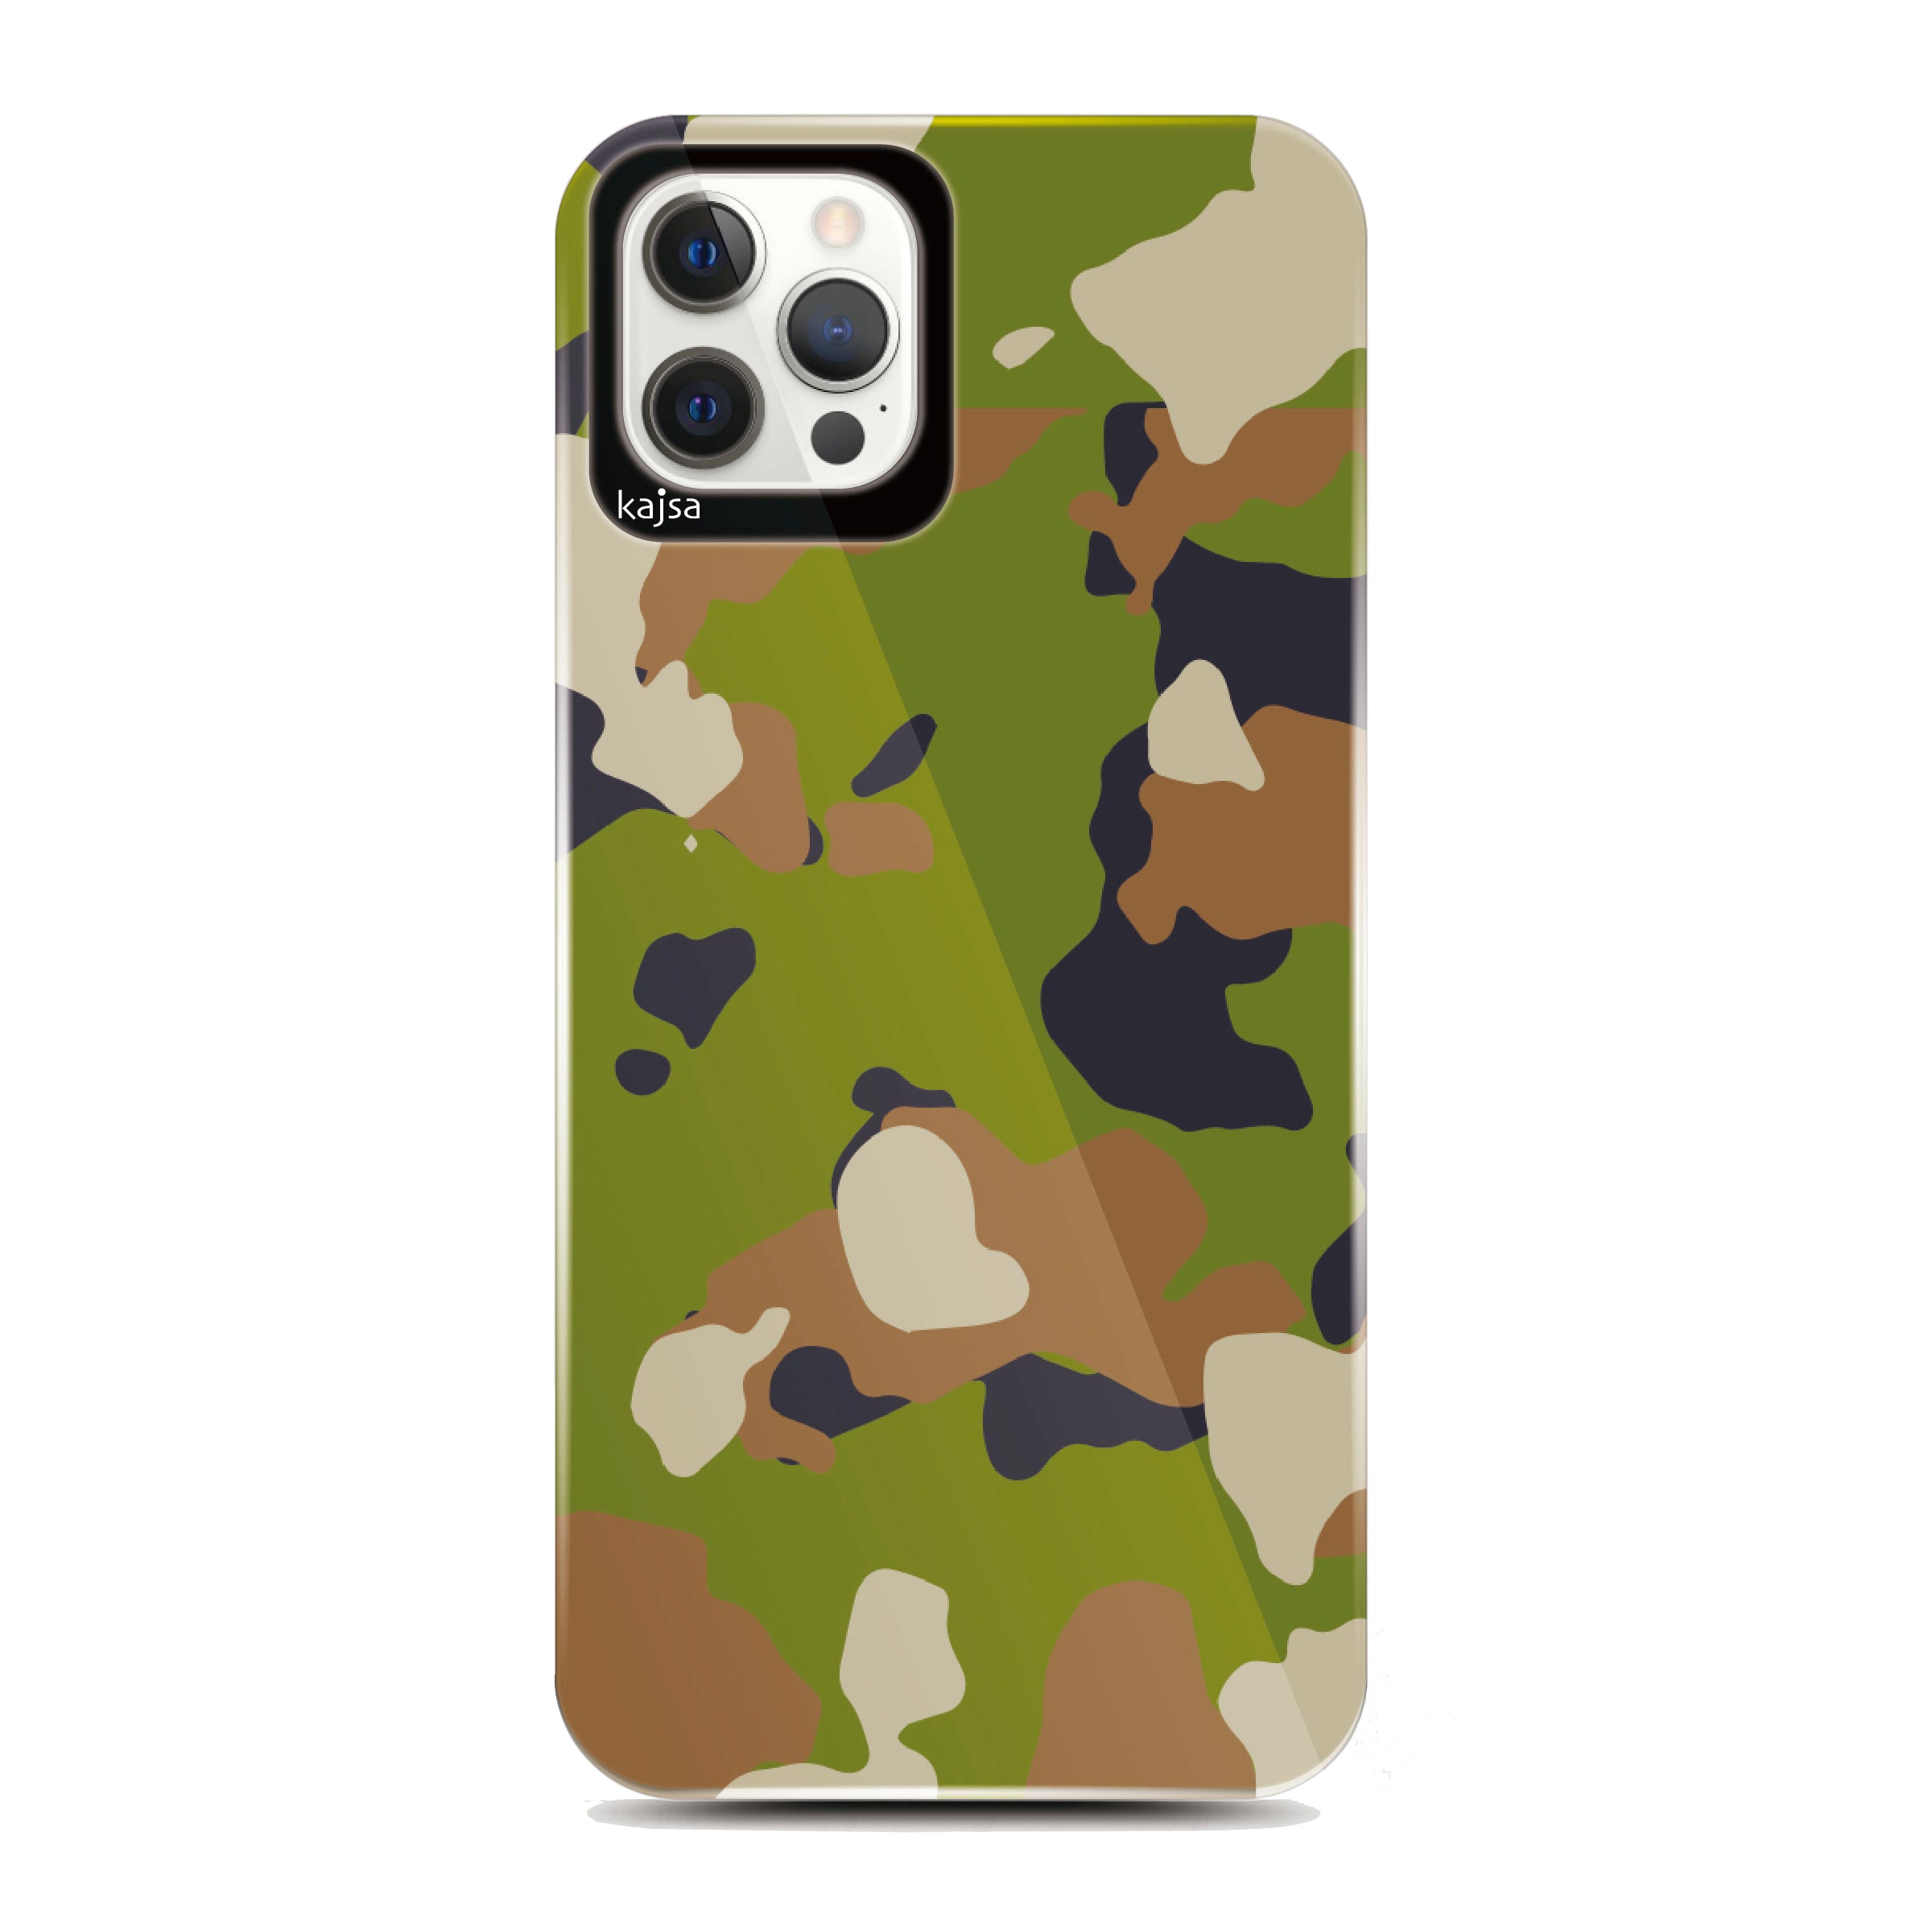 Trans-Shield Collection - Camo Pattern Back Cover for iPhone 12-Phone Case- phone case - phone cases- phone cover- iphone cover- iphone case- iphone cases- leather case- leather cases- DIYCASE - custom case - leather cover - hand strap case - croco pattern case - snake pattern case - carbon fiber phone case - phone case brand - unique phone case - high quality - phone case brand - protective case - buy phone case hong kong - online buy phone case - iphone‎手機殼 - 客製化手機殼 - samsung ‎手機殼 - 香港手機殼 - 買電話殼